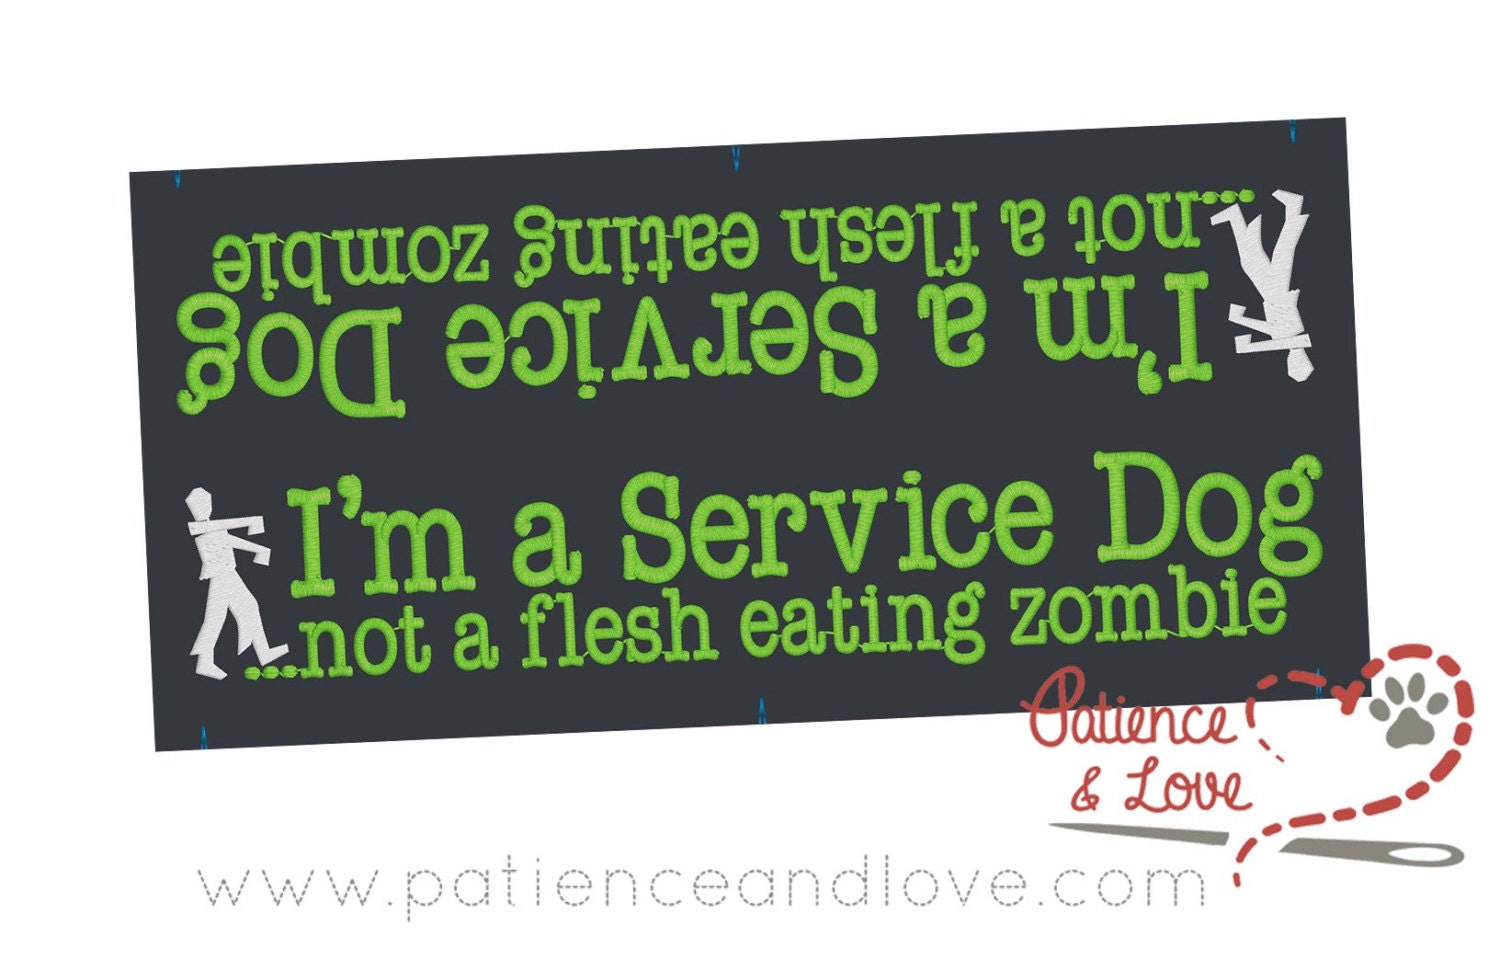  One Leash Sleeve embroidered with   Relax, I'm a Service Dog, Not a flesh eating zombie on both sides.  Listing photo shows a black fabric sleeve with 1950 green text and a white zombie. 